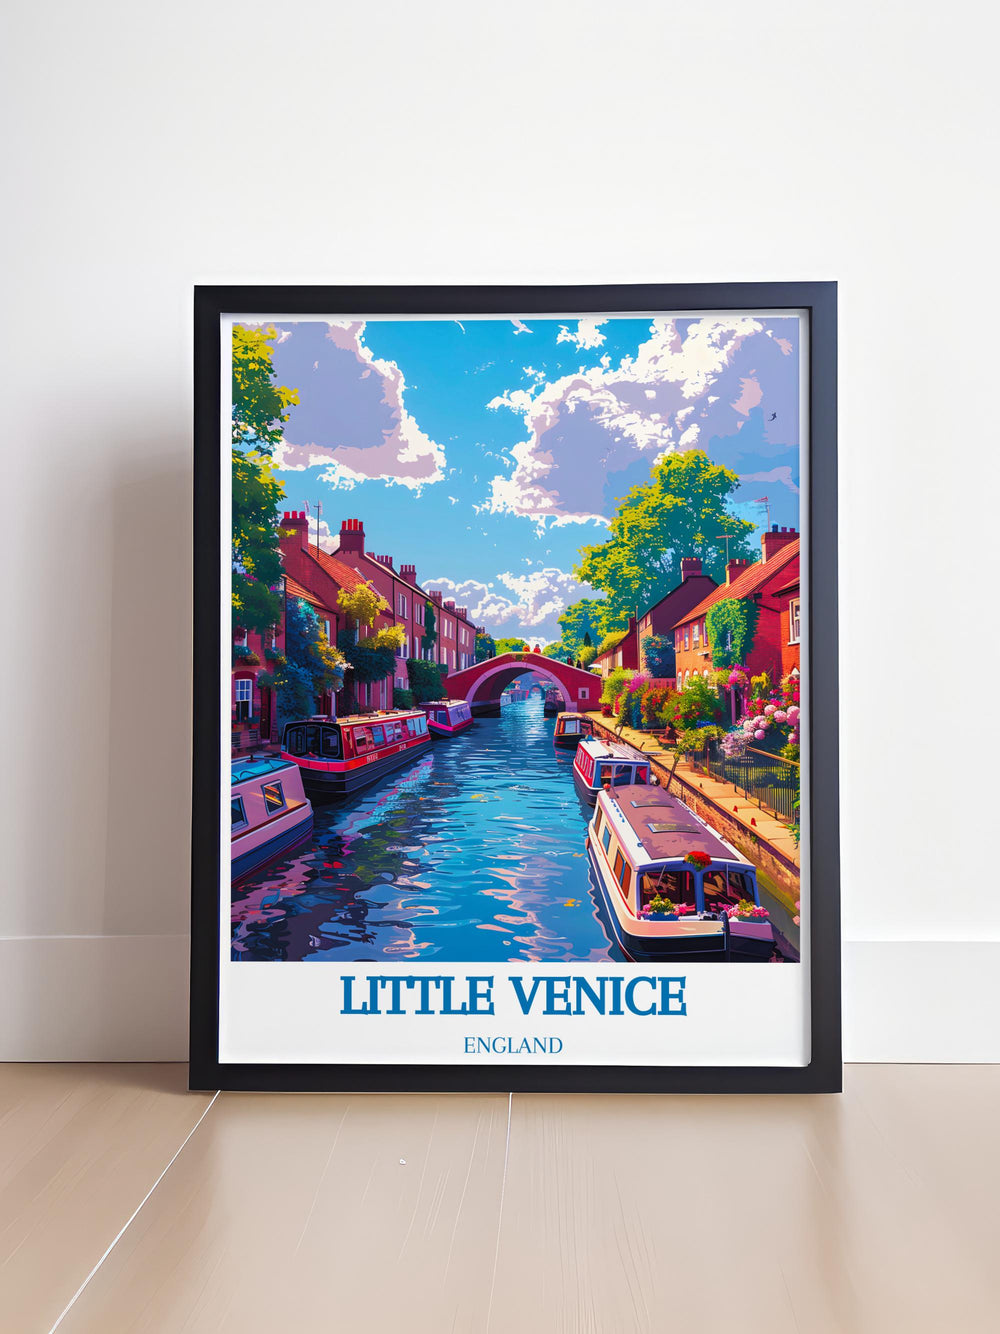 Wall art of Little Venices peaceful canals, ideal for enhancing any living space with serene waterway scenes.